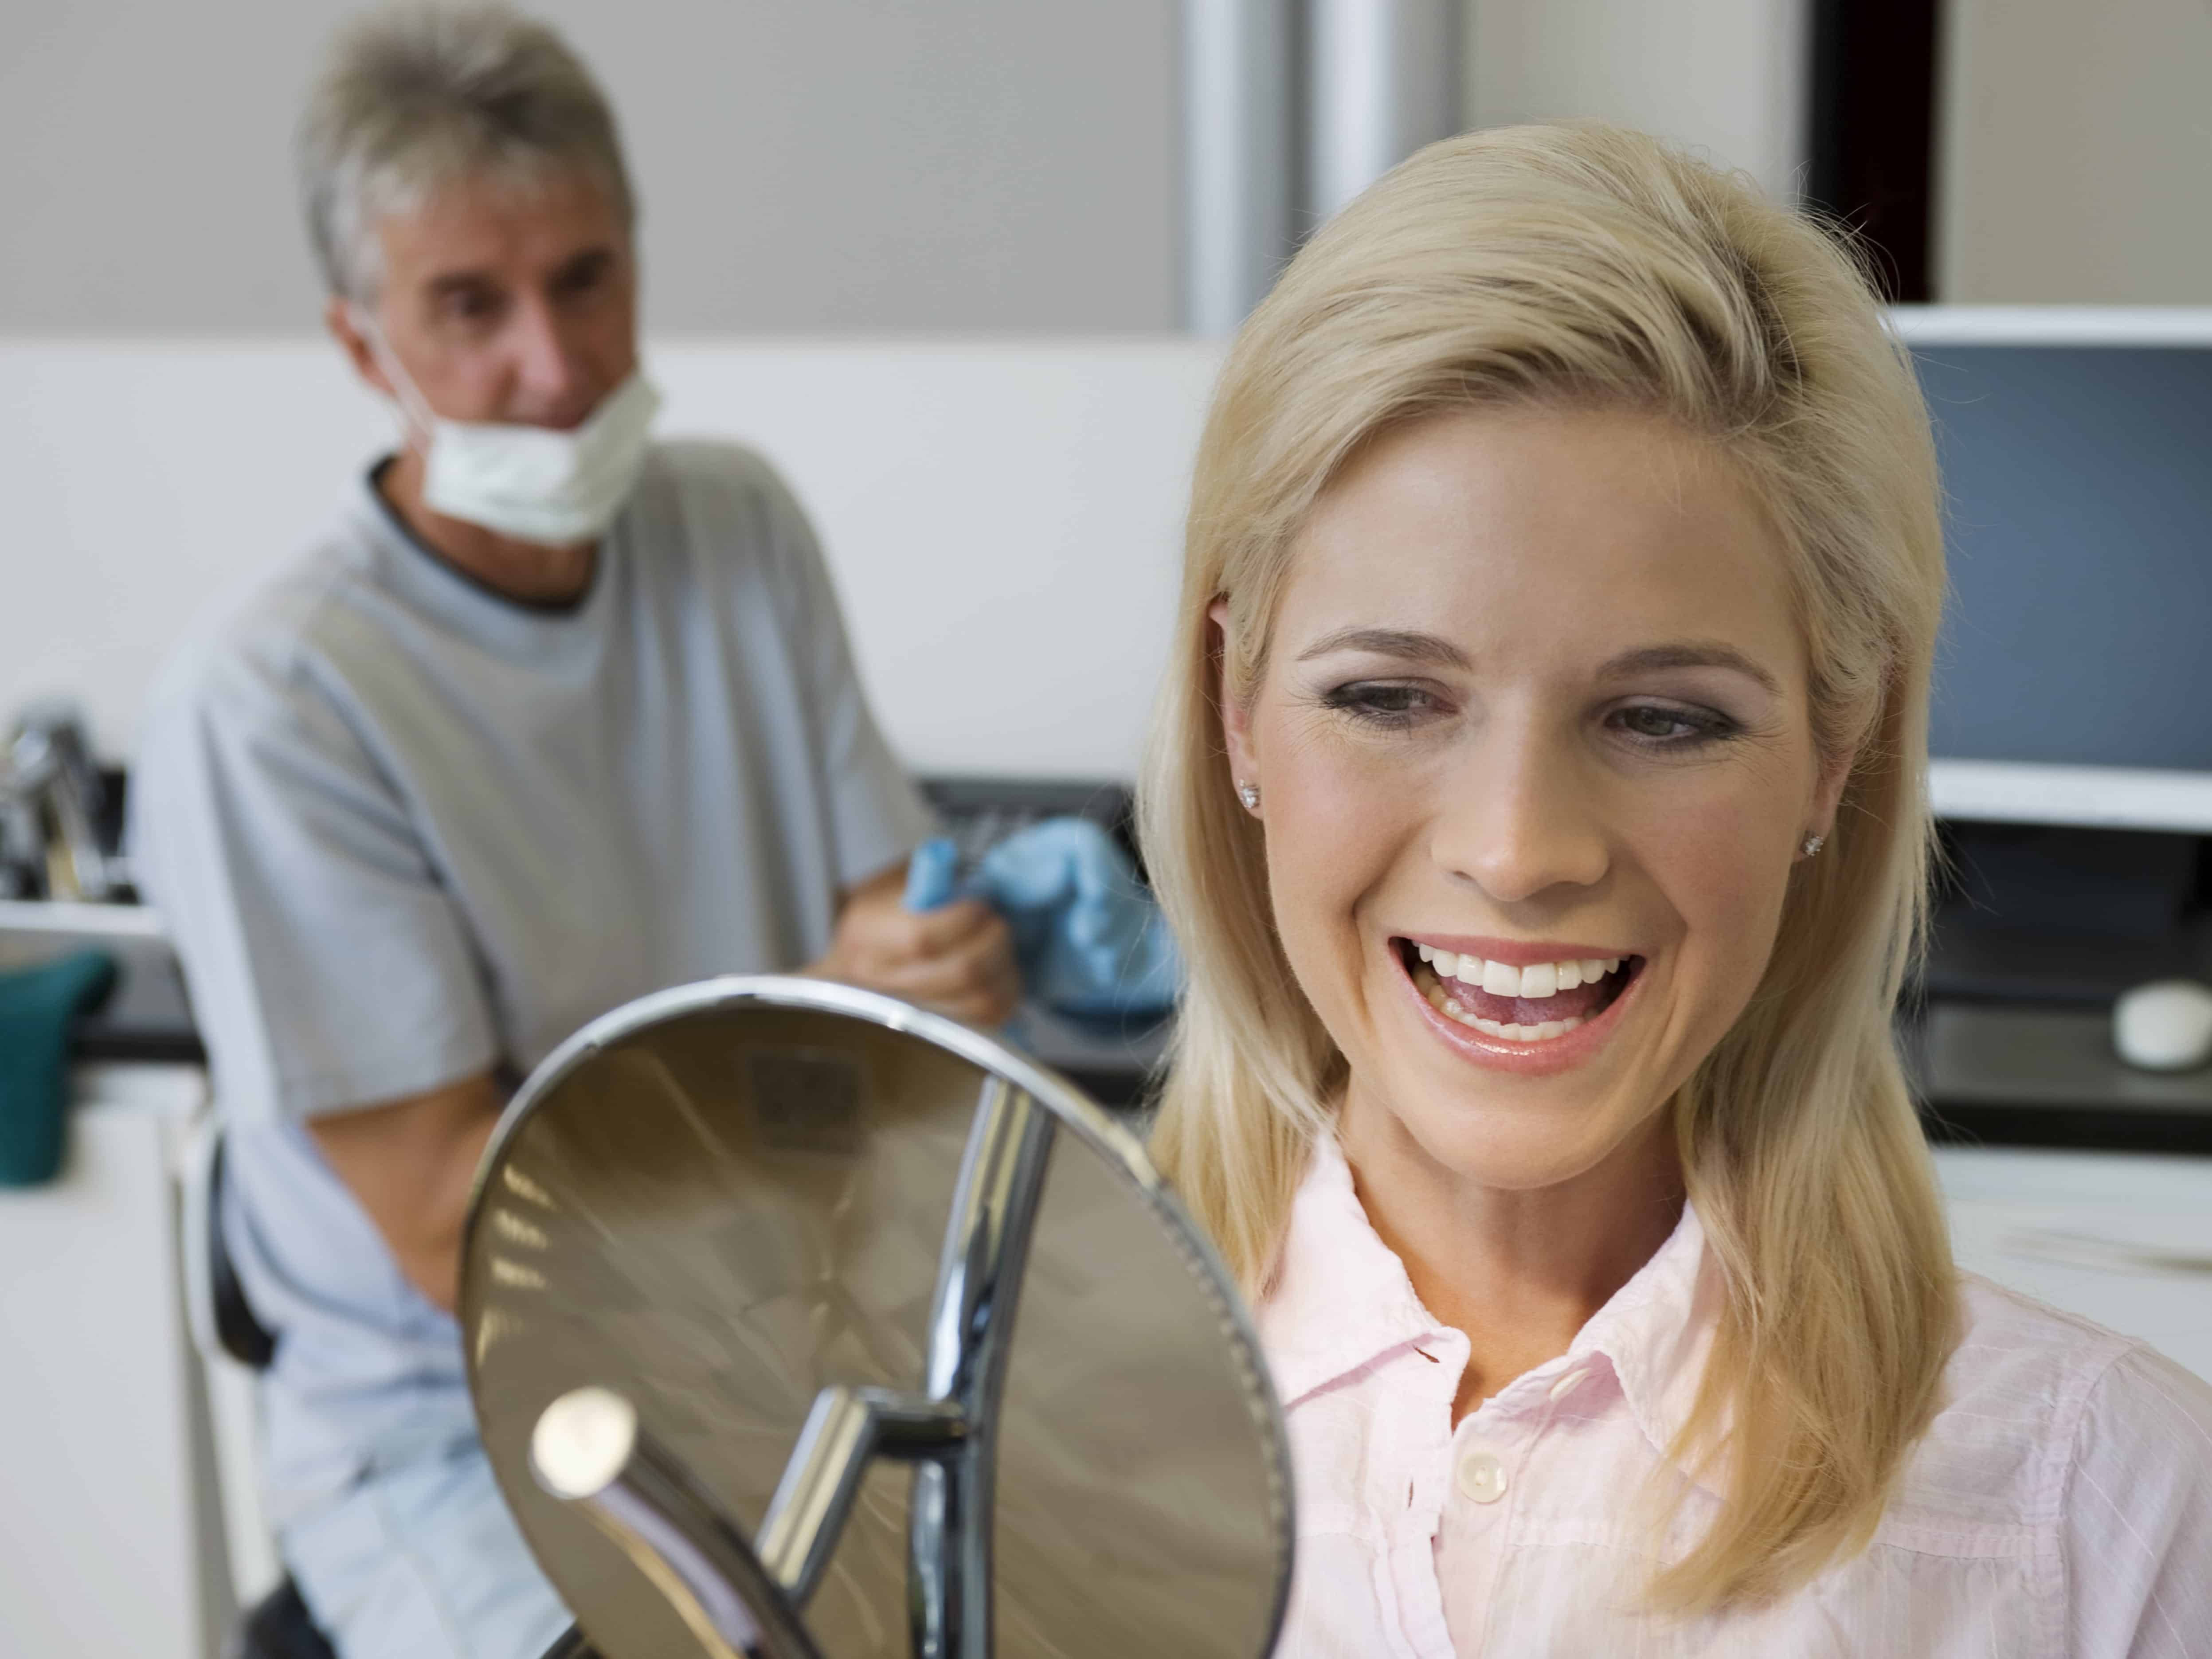 Dental insurance, why you should use it